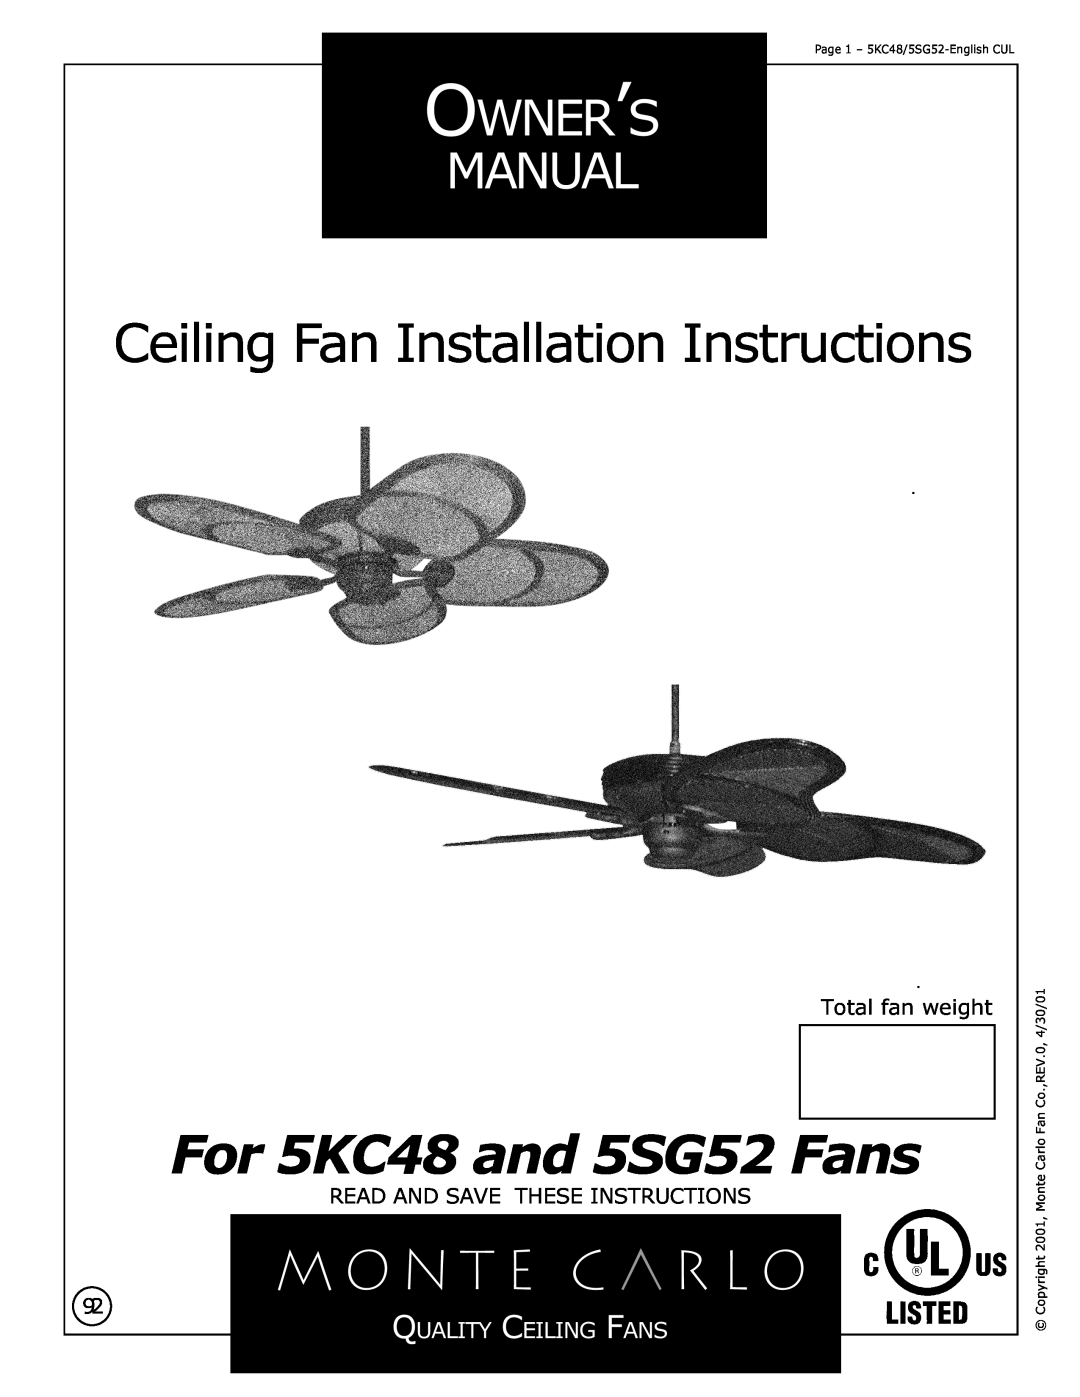 Monte Carlo Fan Company owner manual Total fan weight, Read And Save These Instructions, For 5KC48 and 5SG52 Fans 